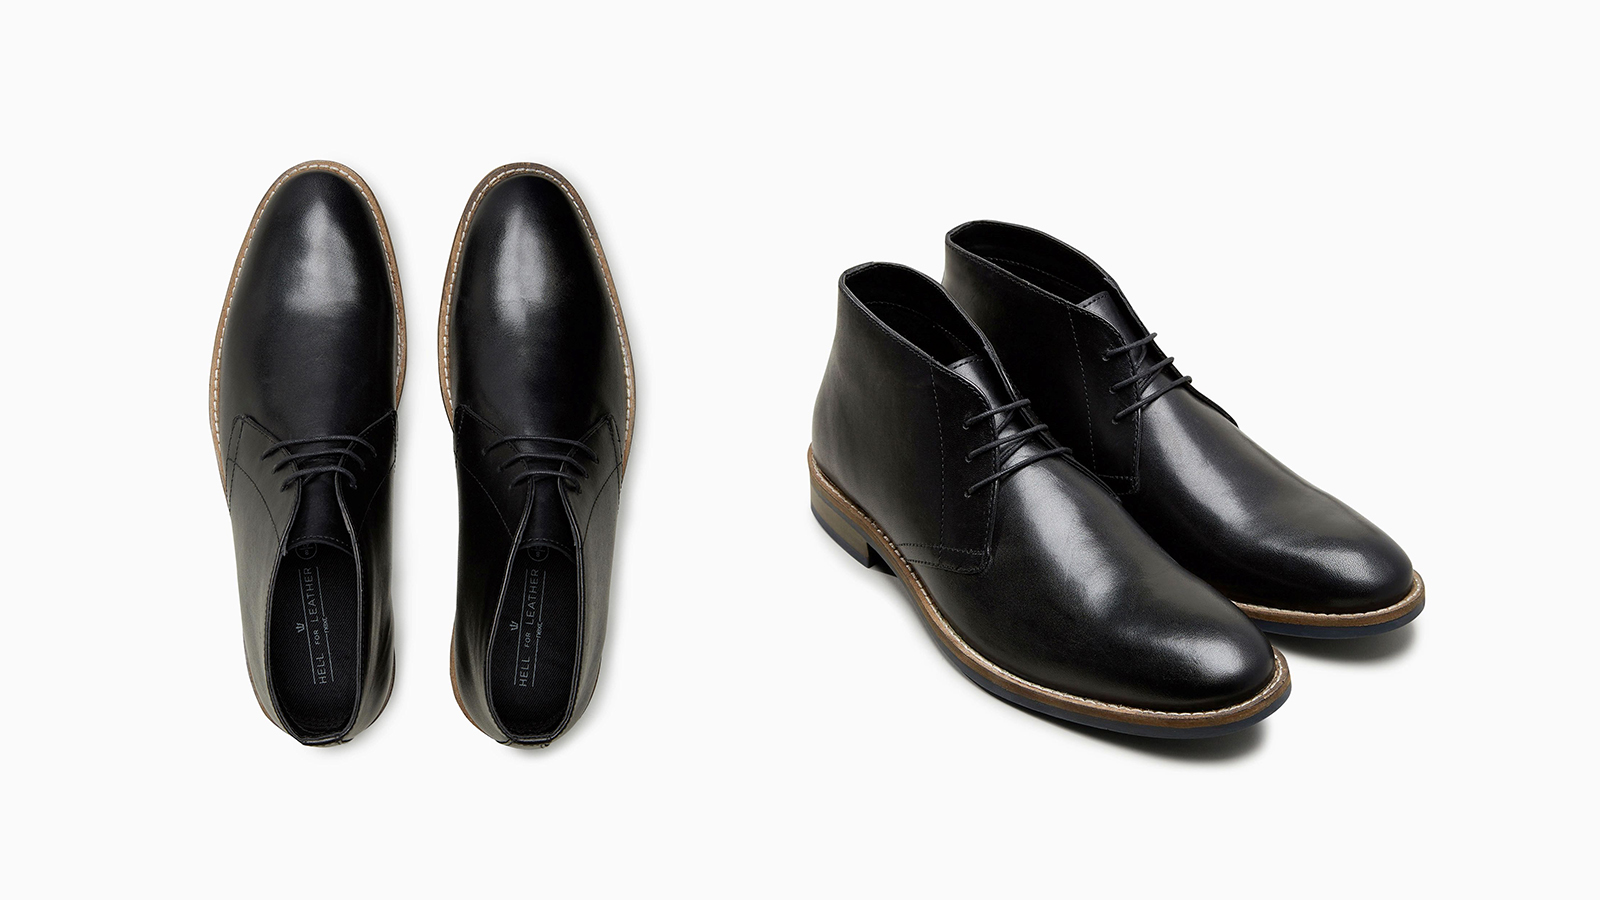 The boots to wear for winter - Chukka boots